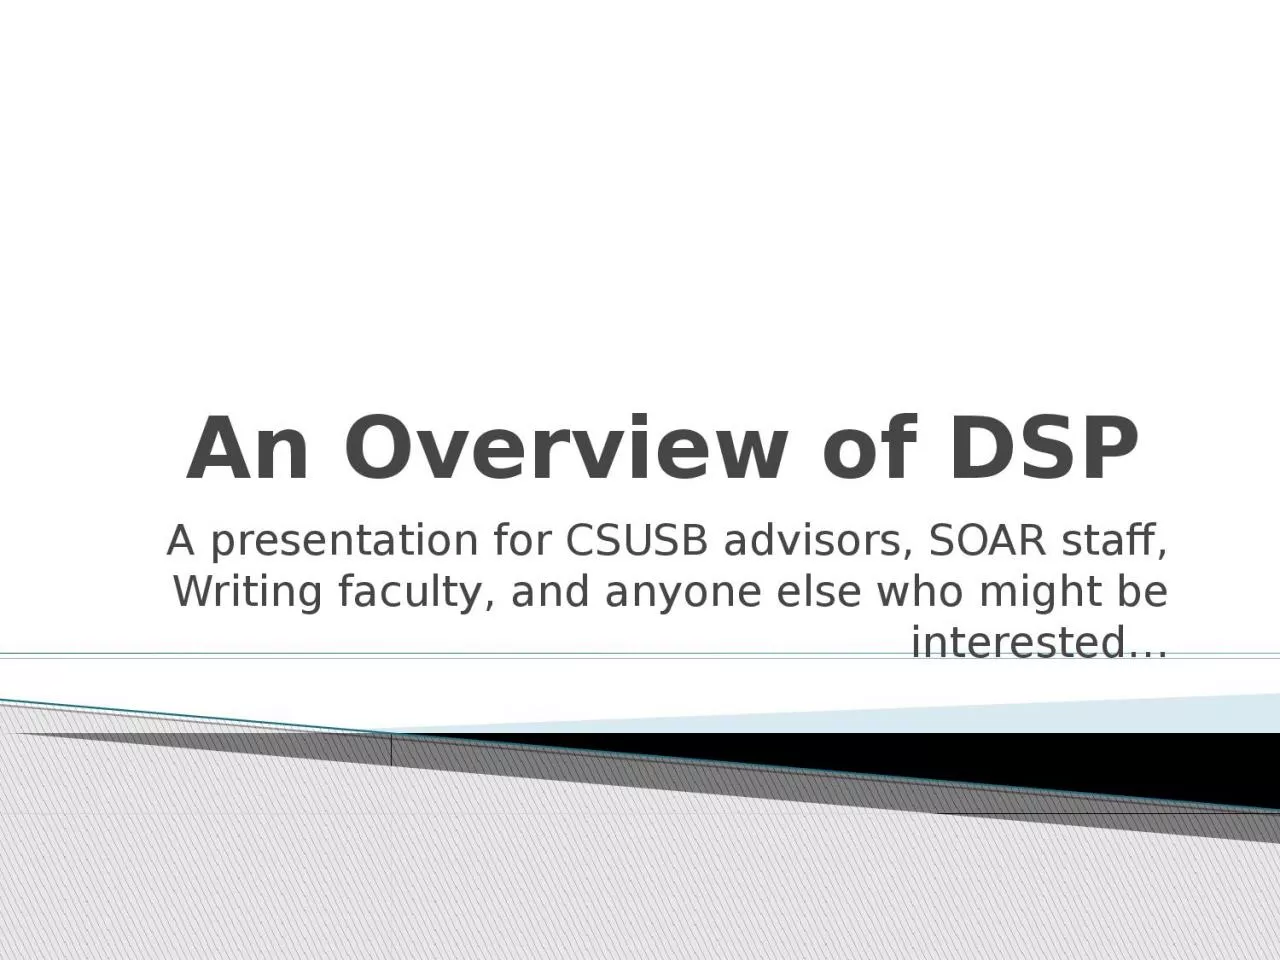 An Overview of DSP  A presentation for CSUSB advisors, SOAR staff, Writing faculty, and